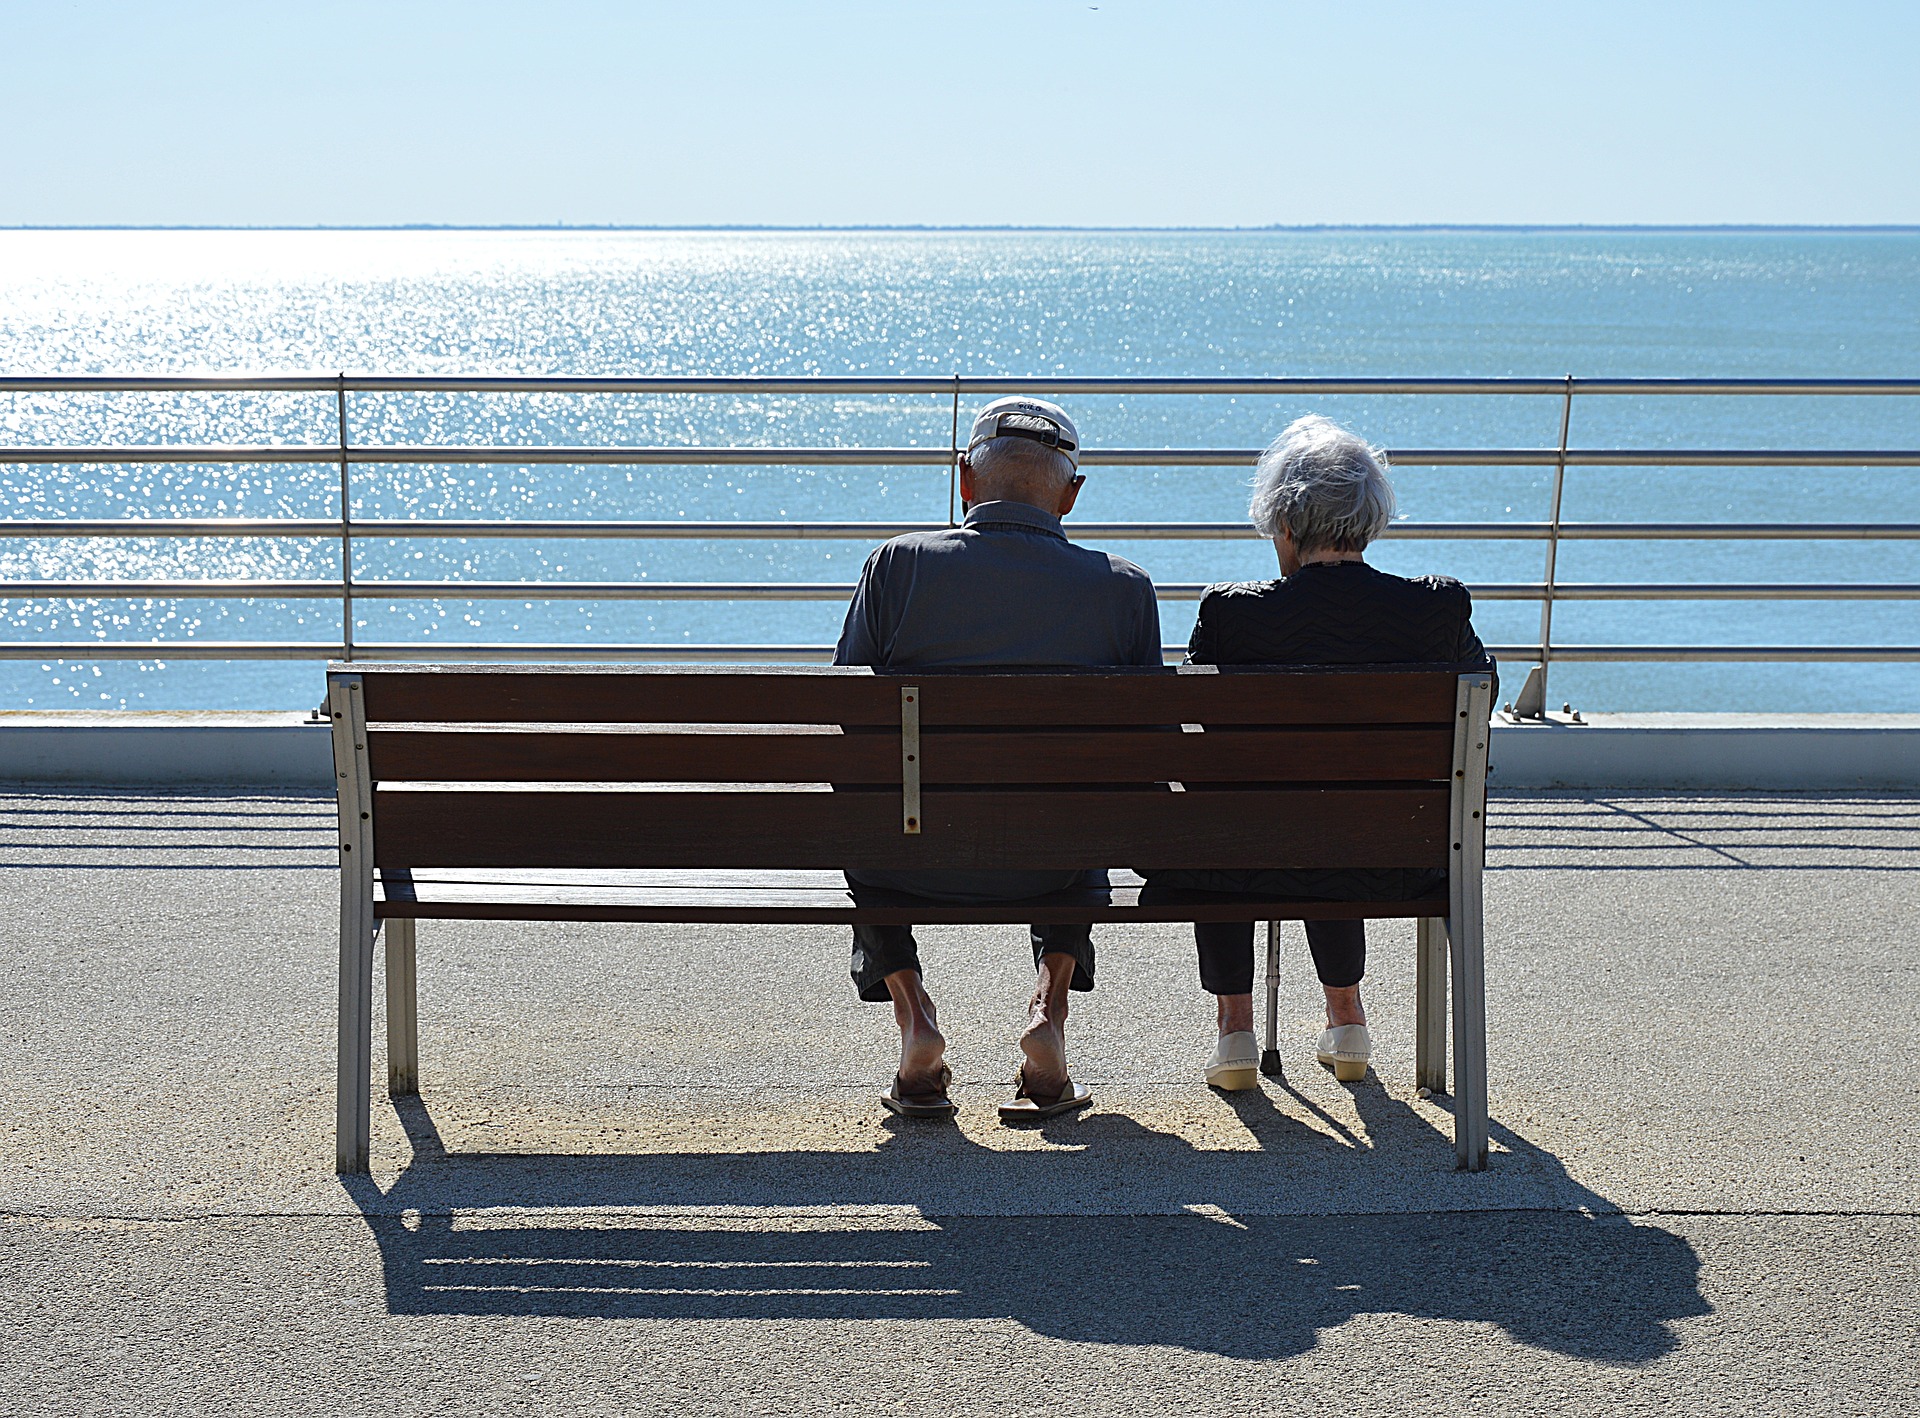 Old couple sitting on a bench next to a lake